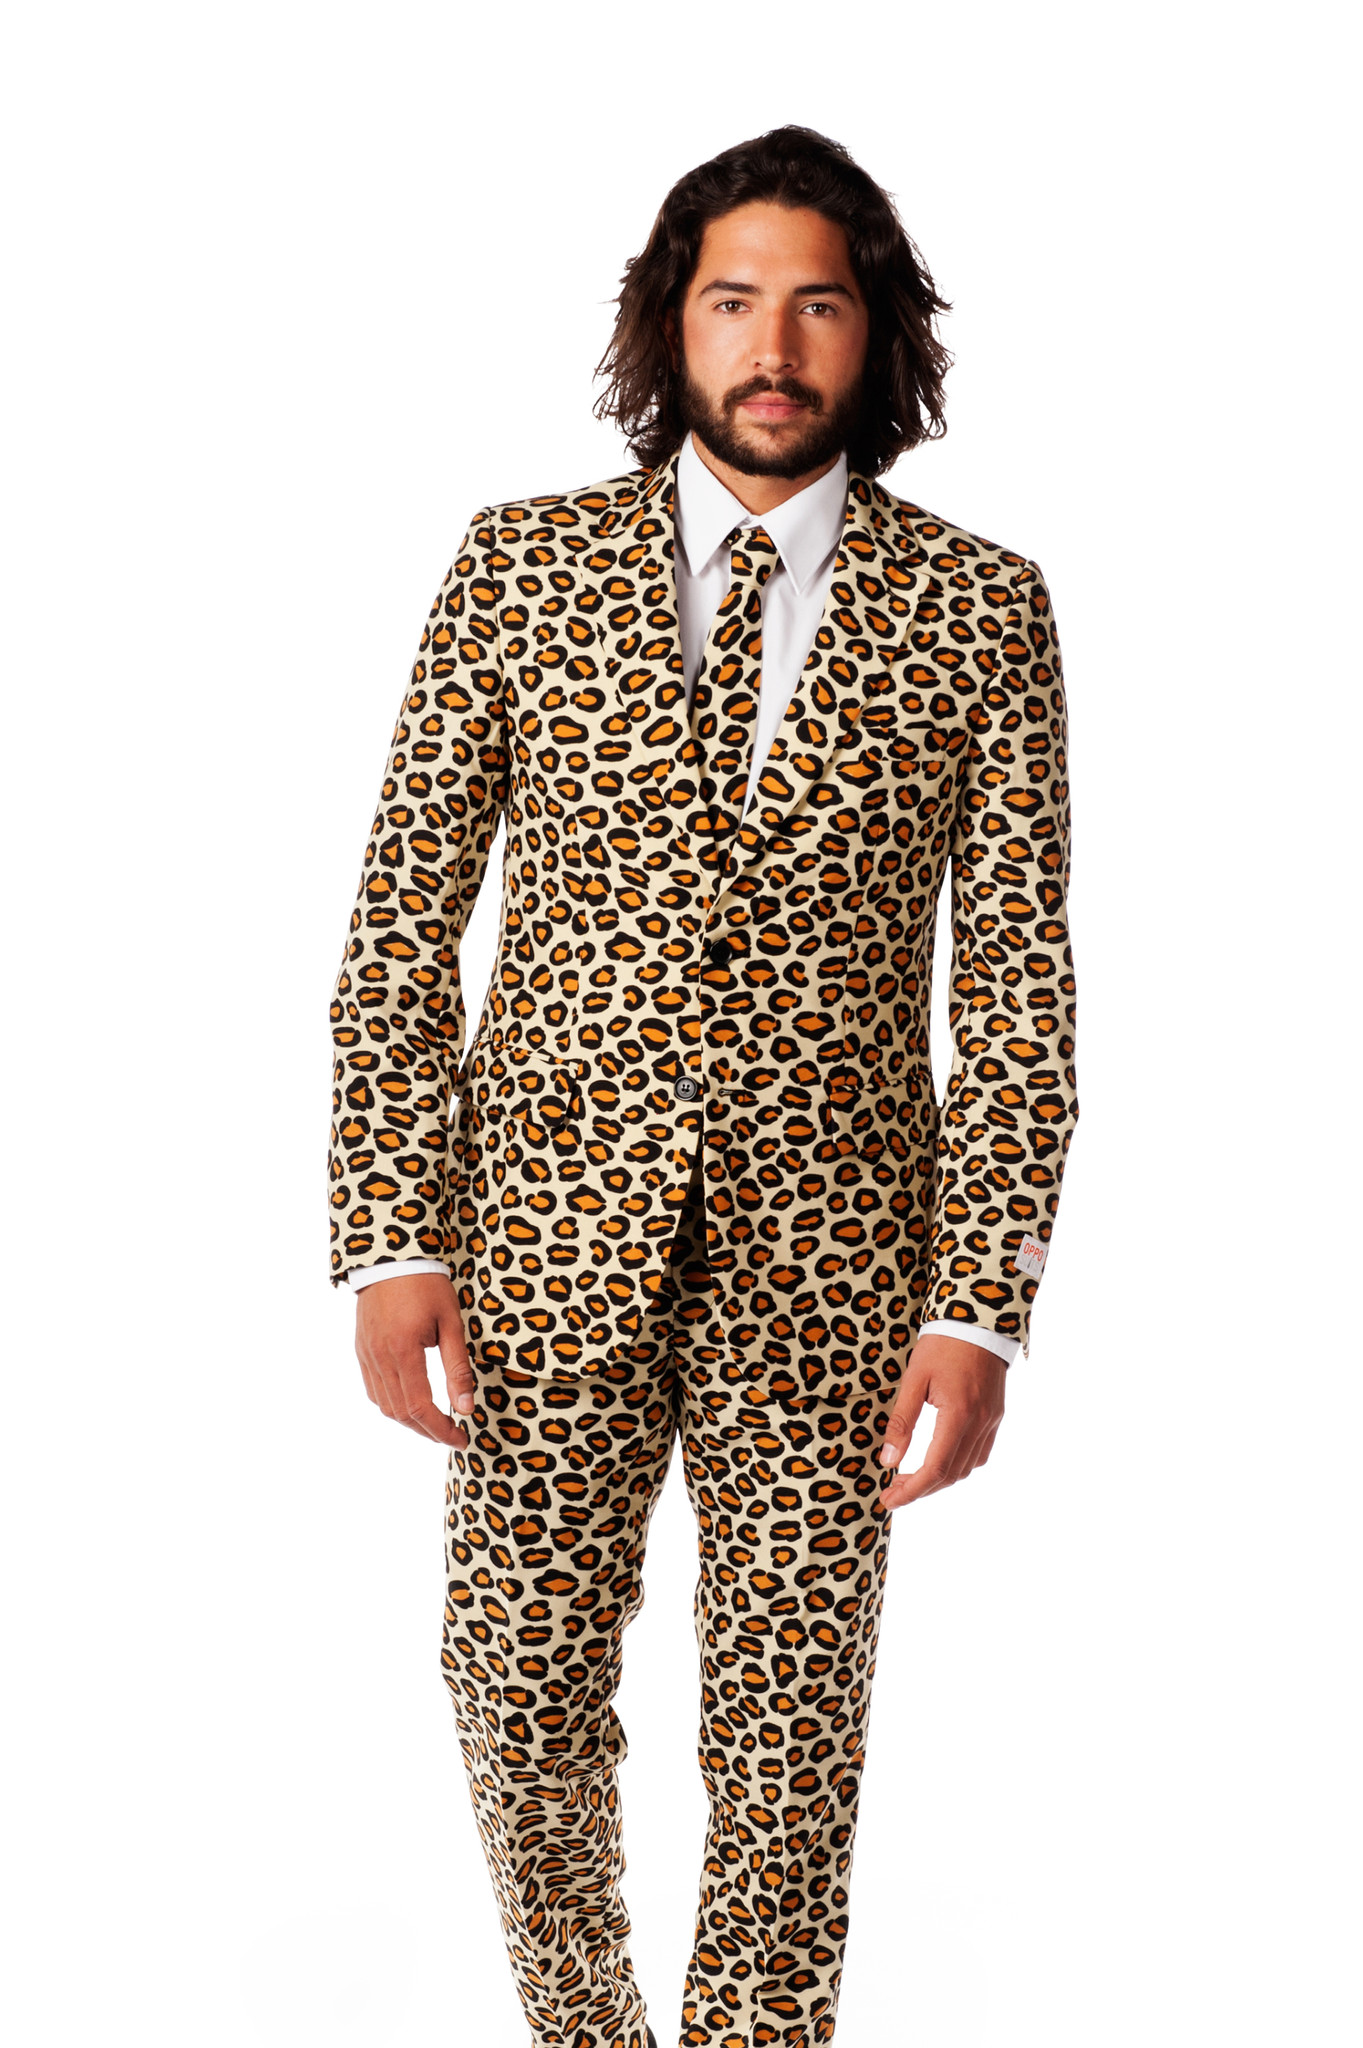 The highly seductive evening leopard suit